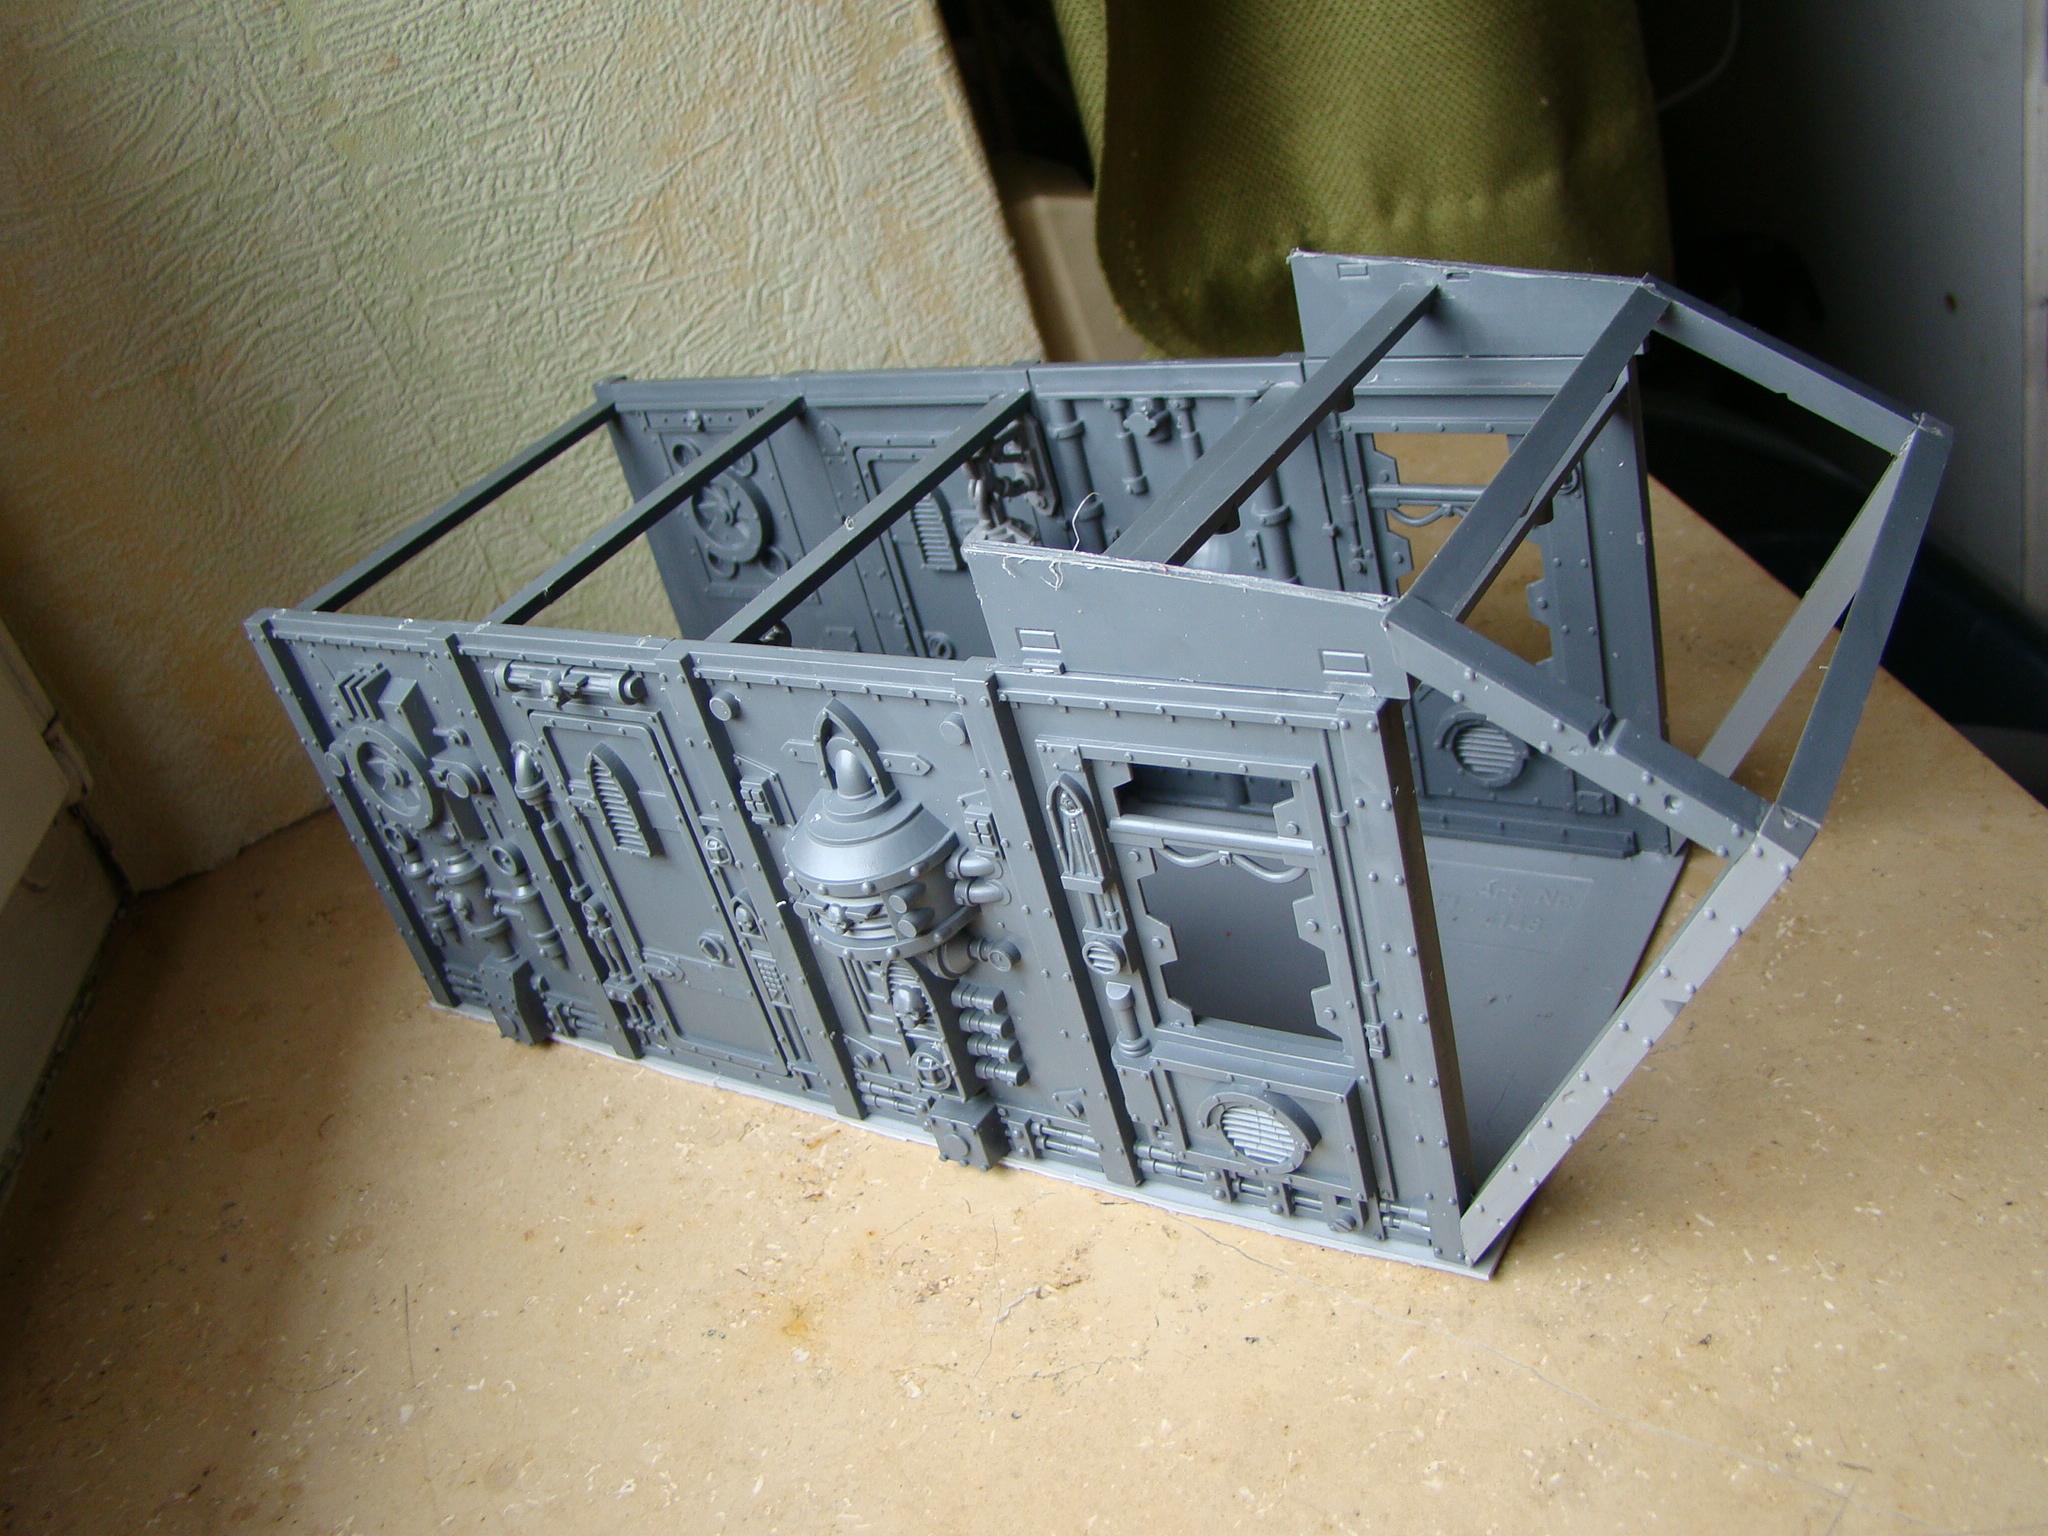 Warhammer 40,000, basic structure right side